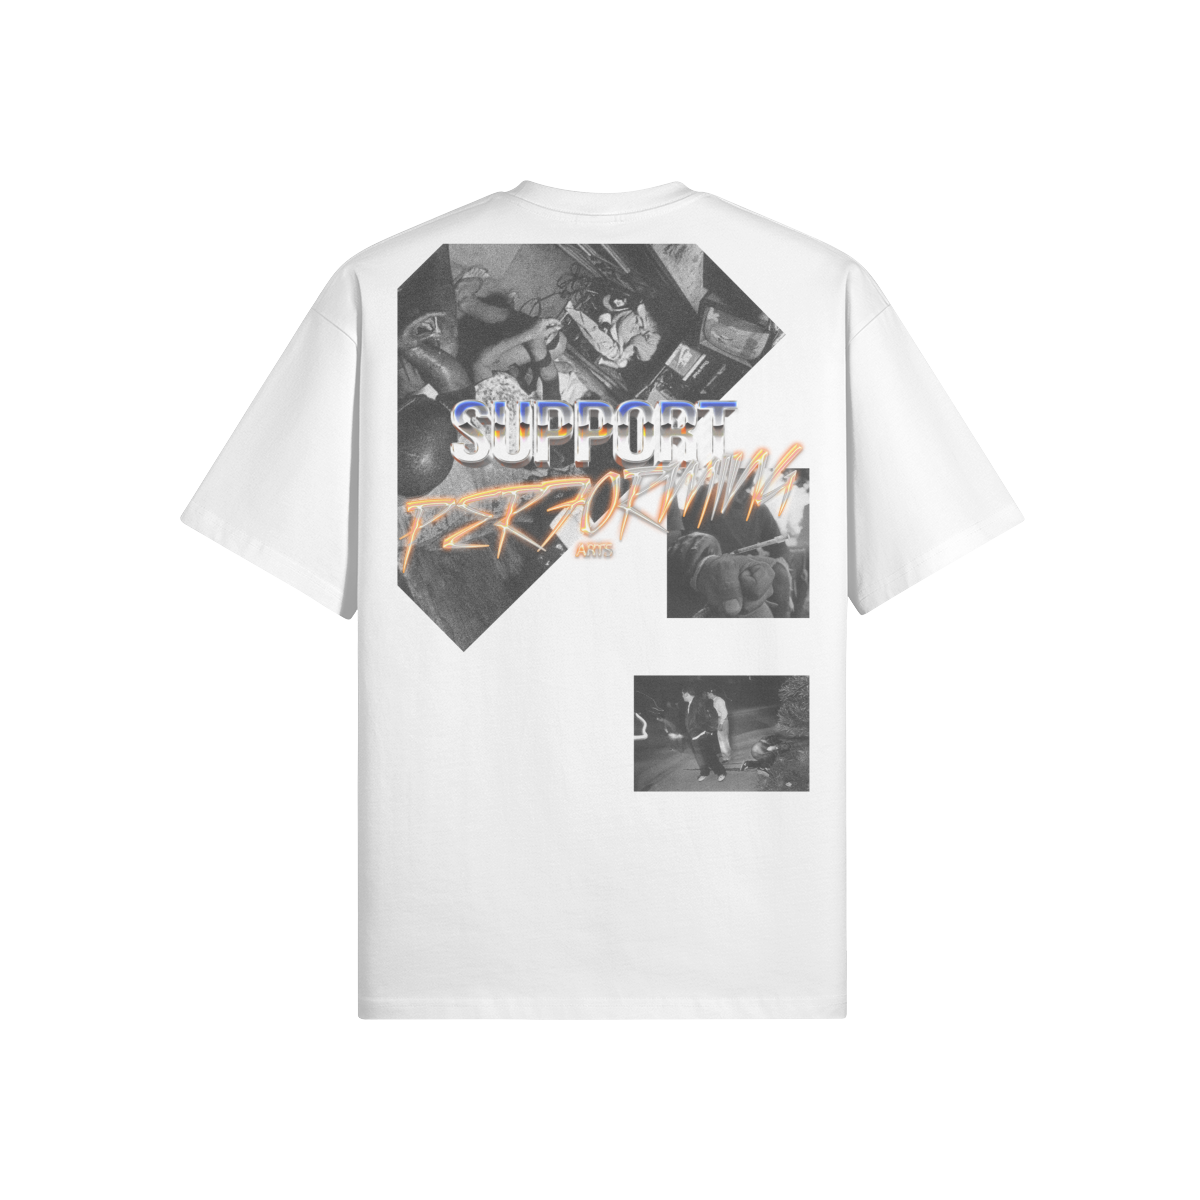 SUPPORT THE STREETS T-SHIRT